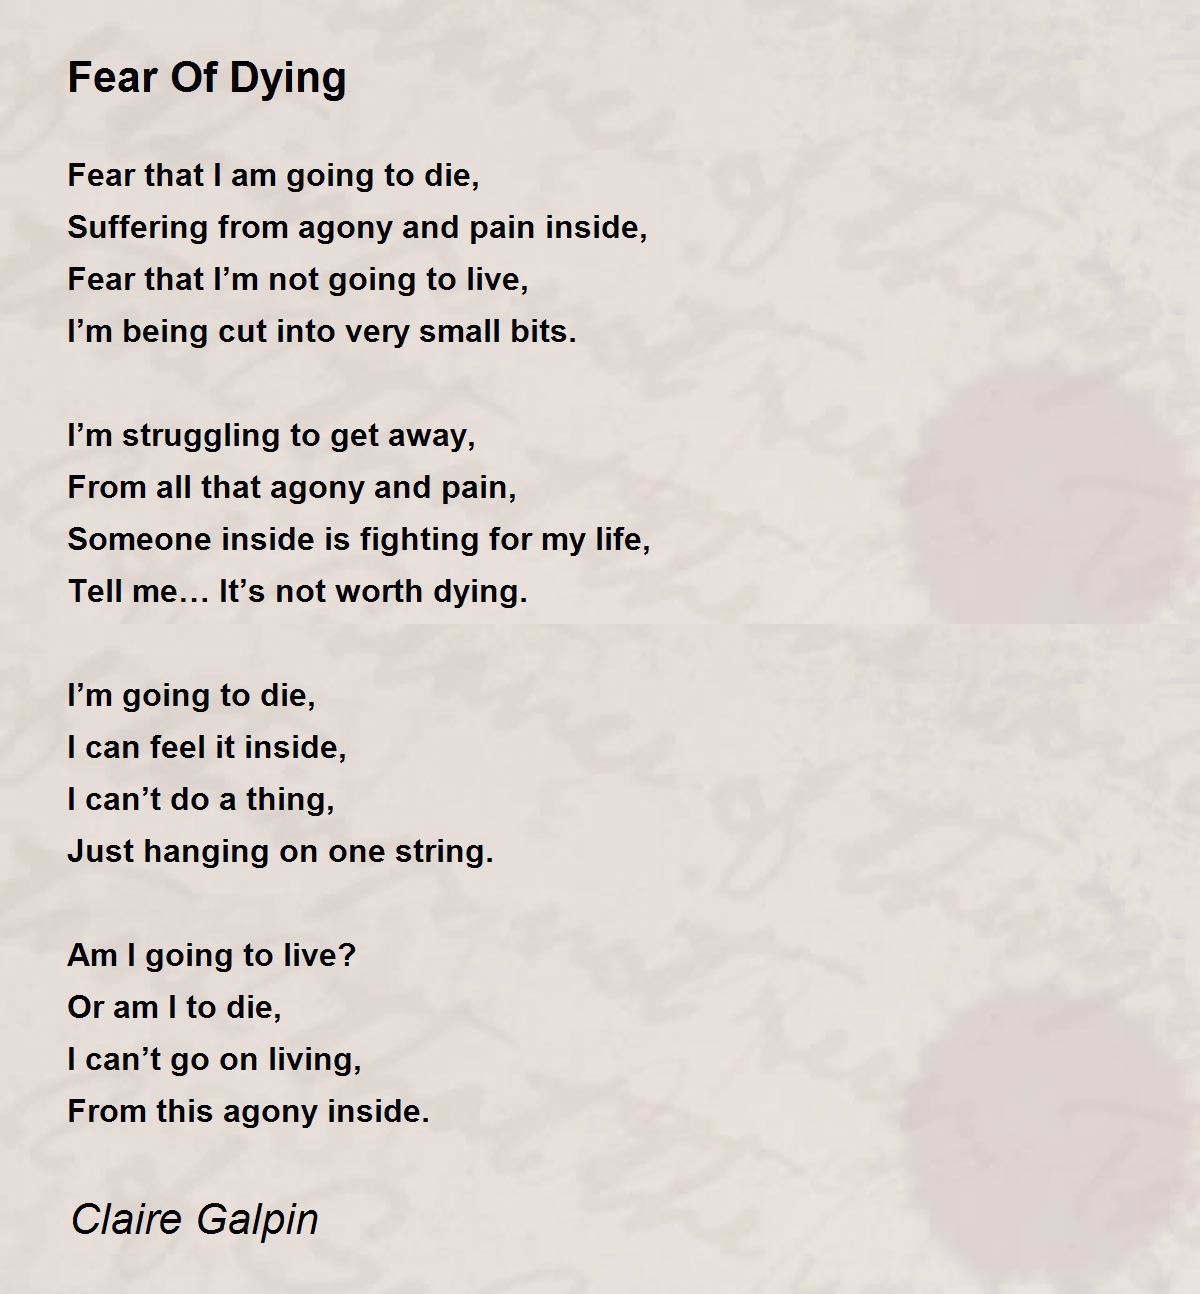 poems on death and dying